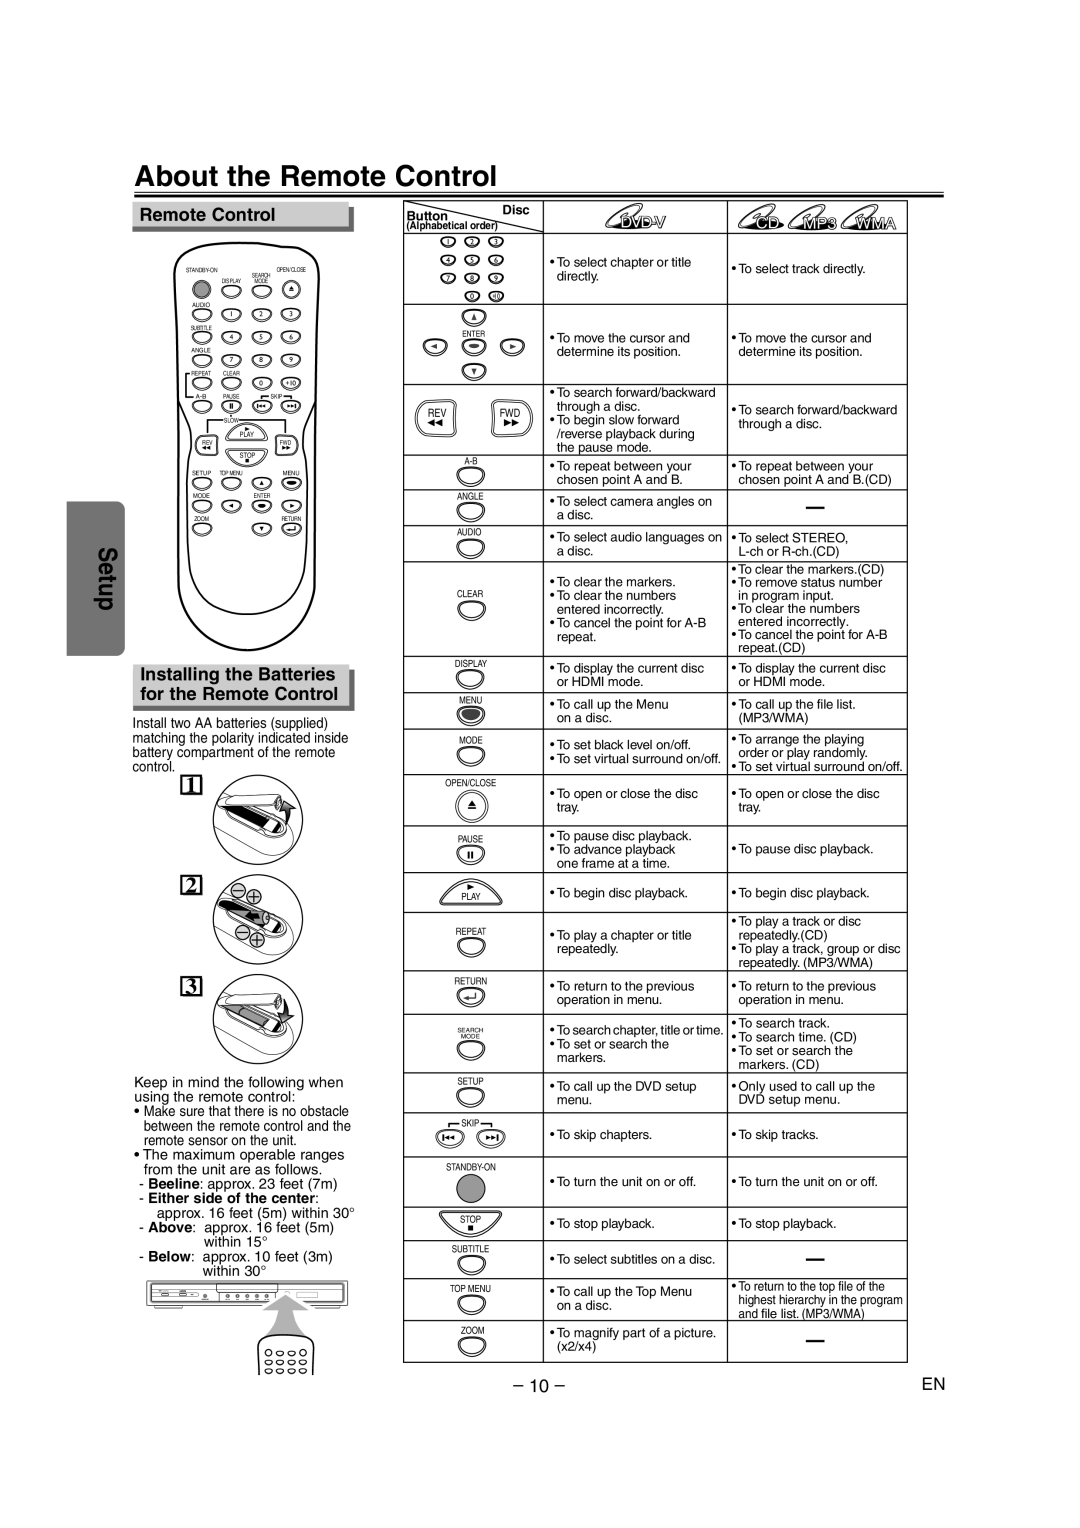 FUNAI MSD1005 About the Remote Control, Setup, Installing the Batteries for the Remote Control, Dvd-V, MP3 WMA, Button 